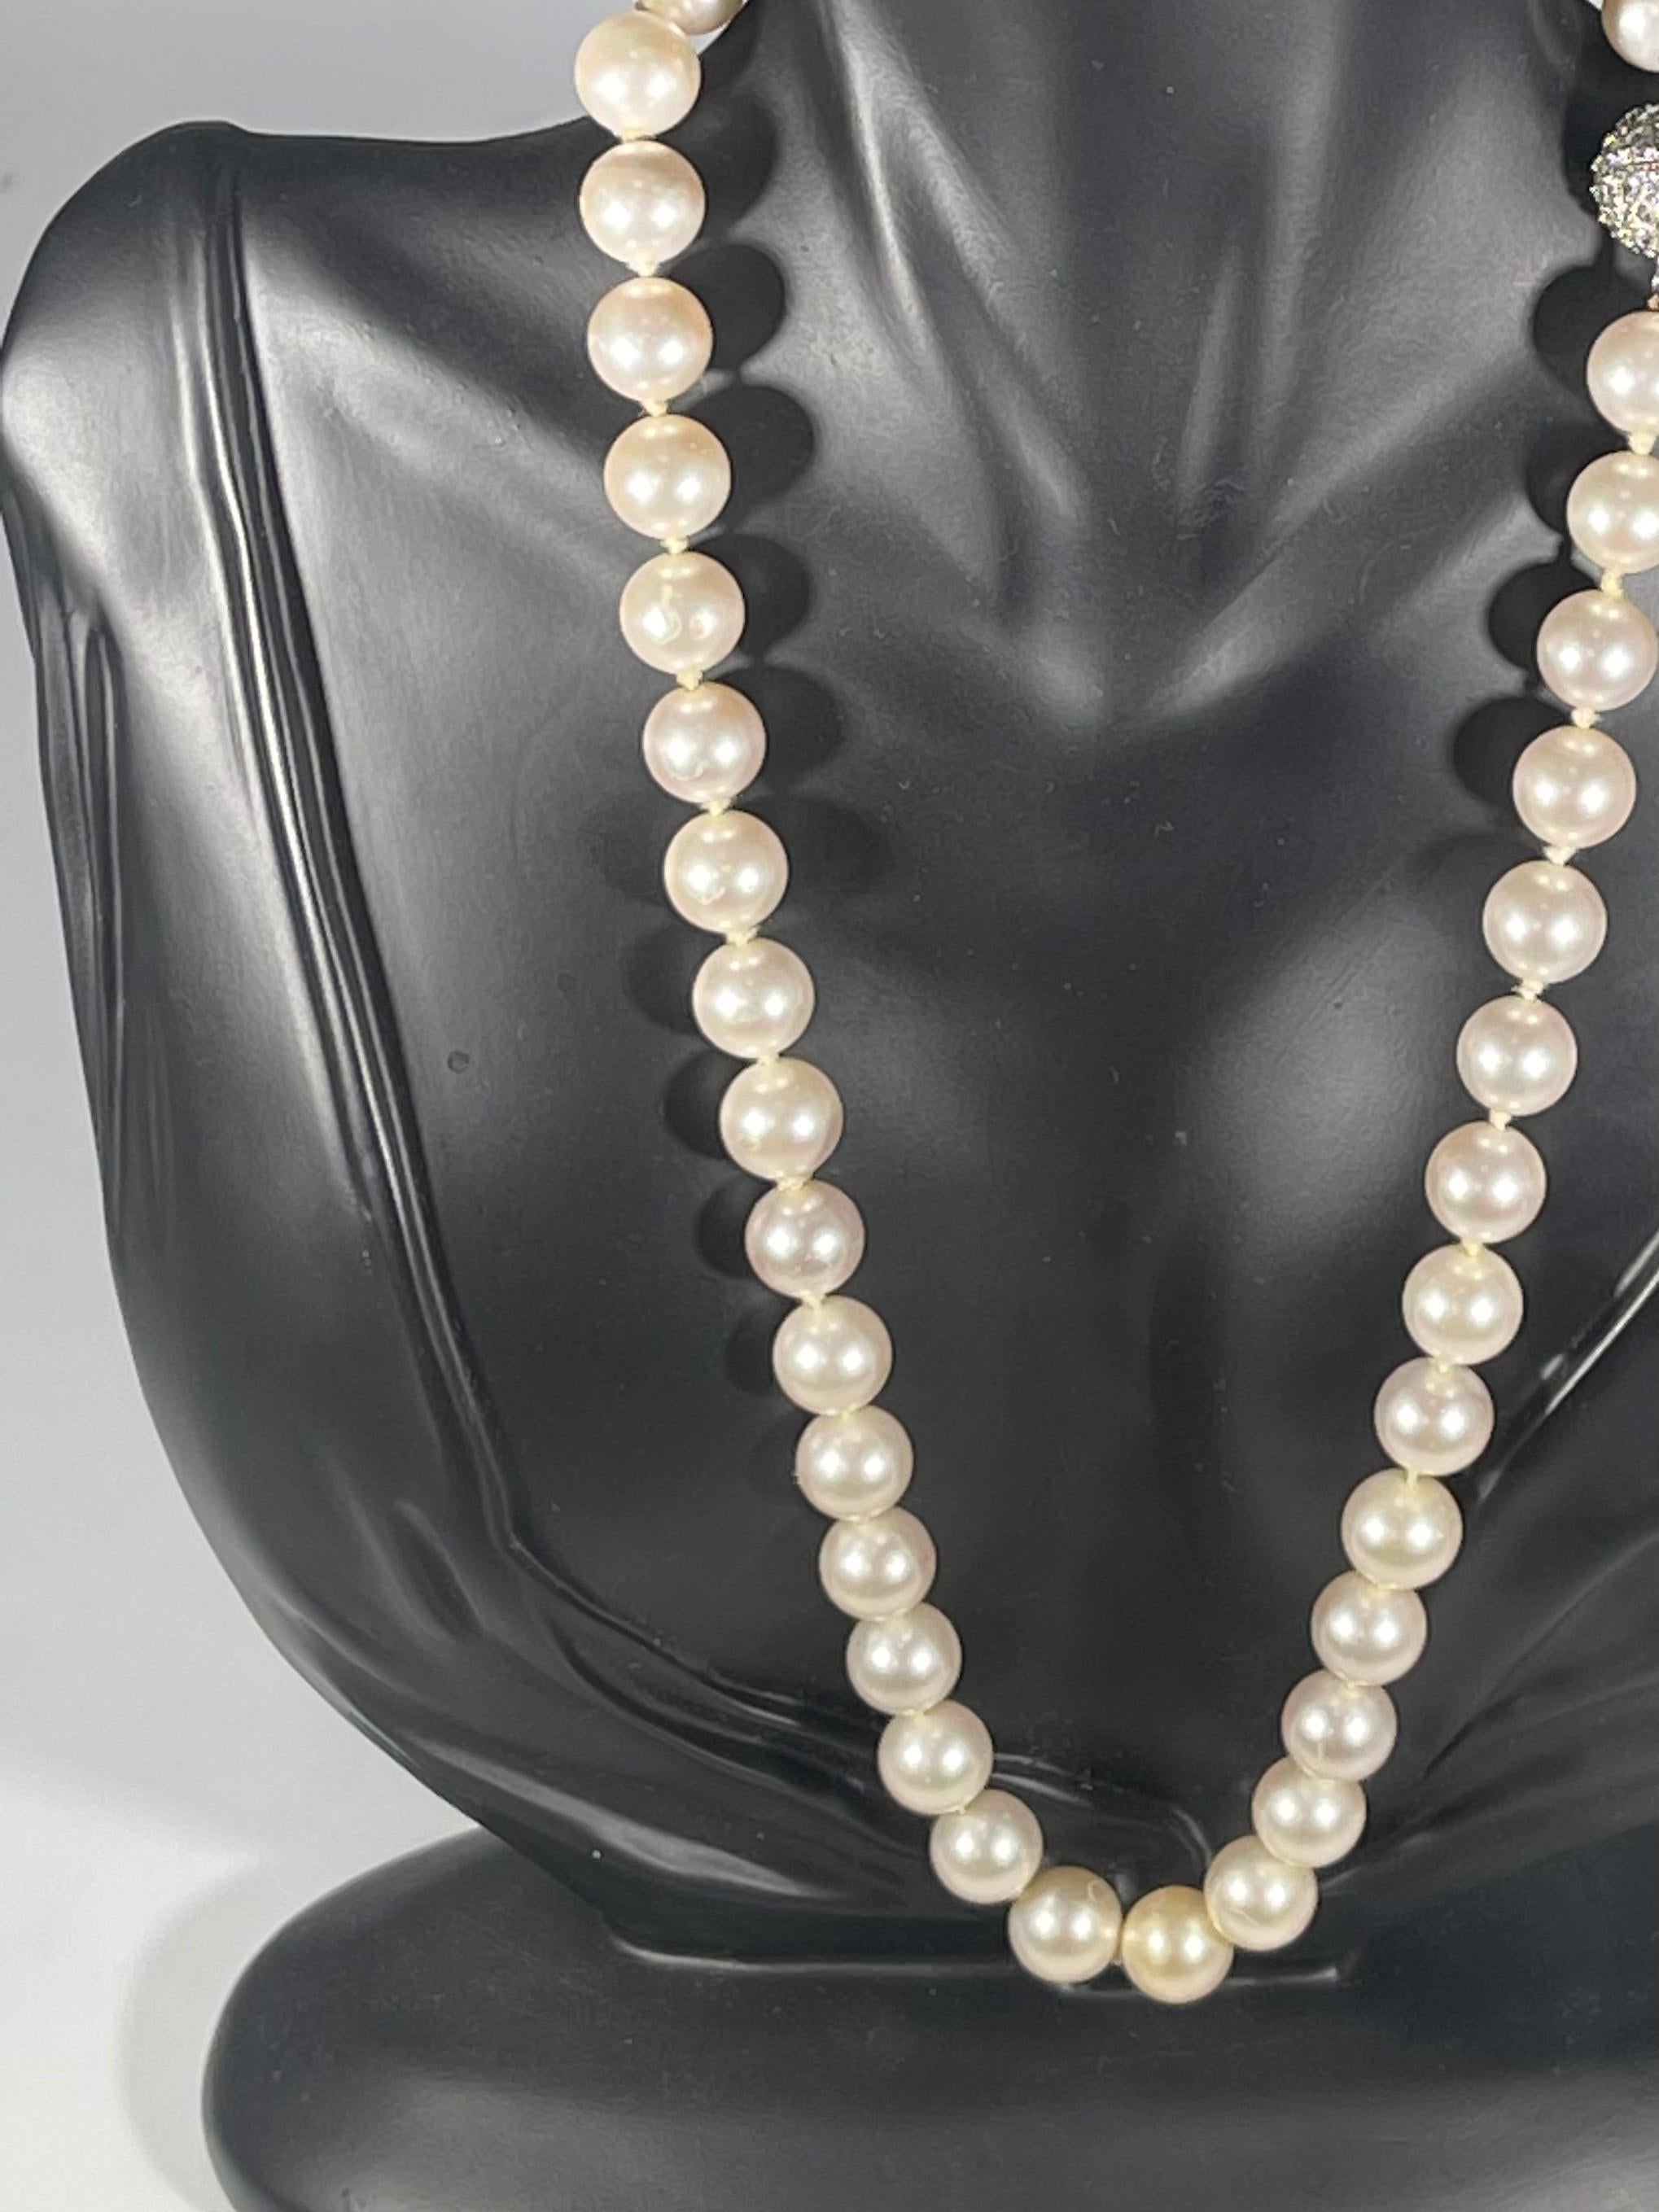 Women's 41 Round Akoya Pearls Strand Necklace Set in Metal Ball Clasp For Sale